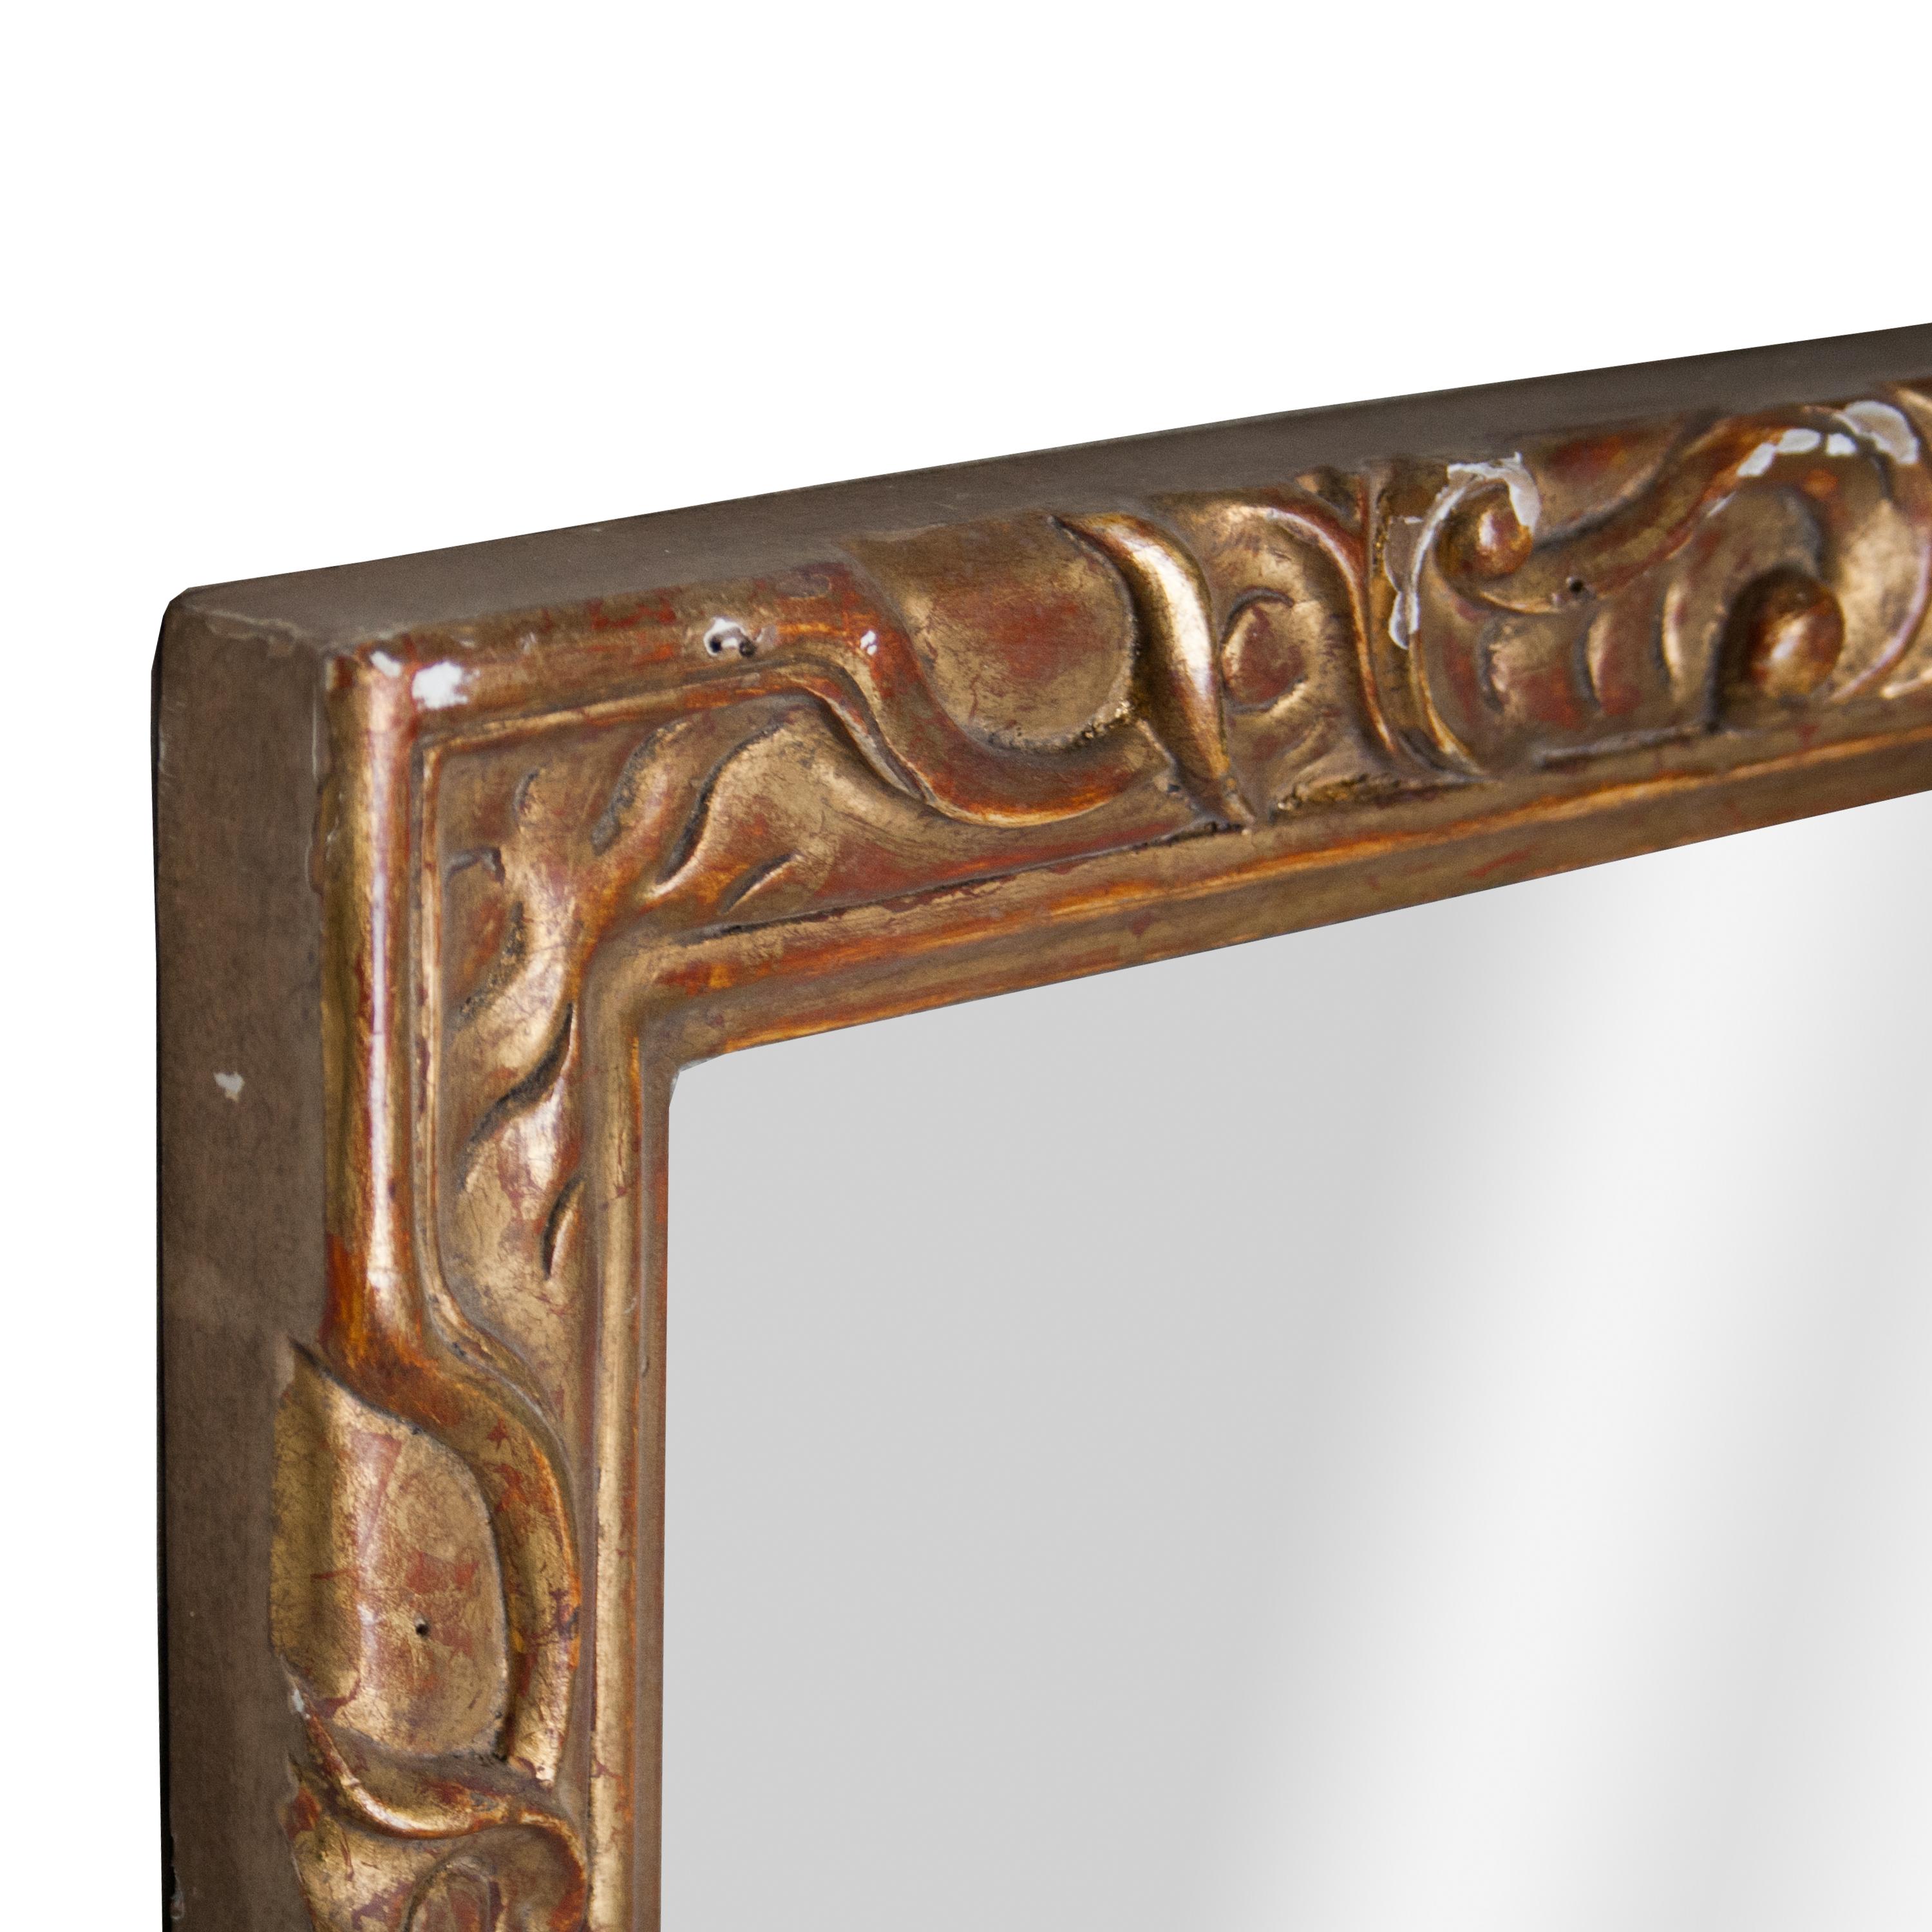 Neoclassical Revival Neoclassical Empire Rectangular Gold Hand Carved Wooden Mirror, Spain, 1970 For Sale